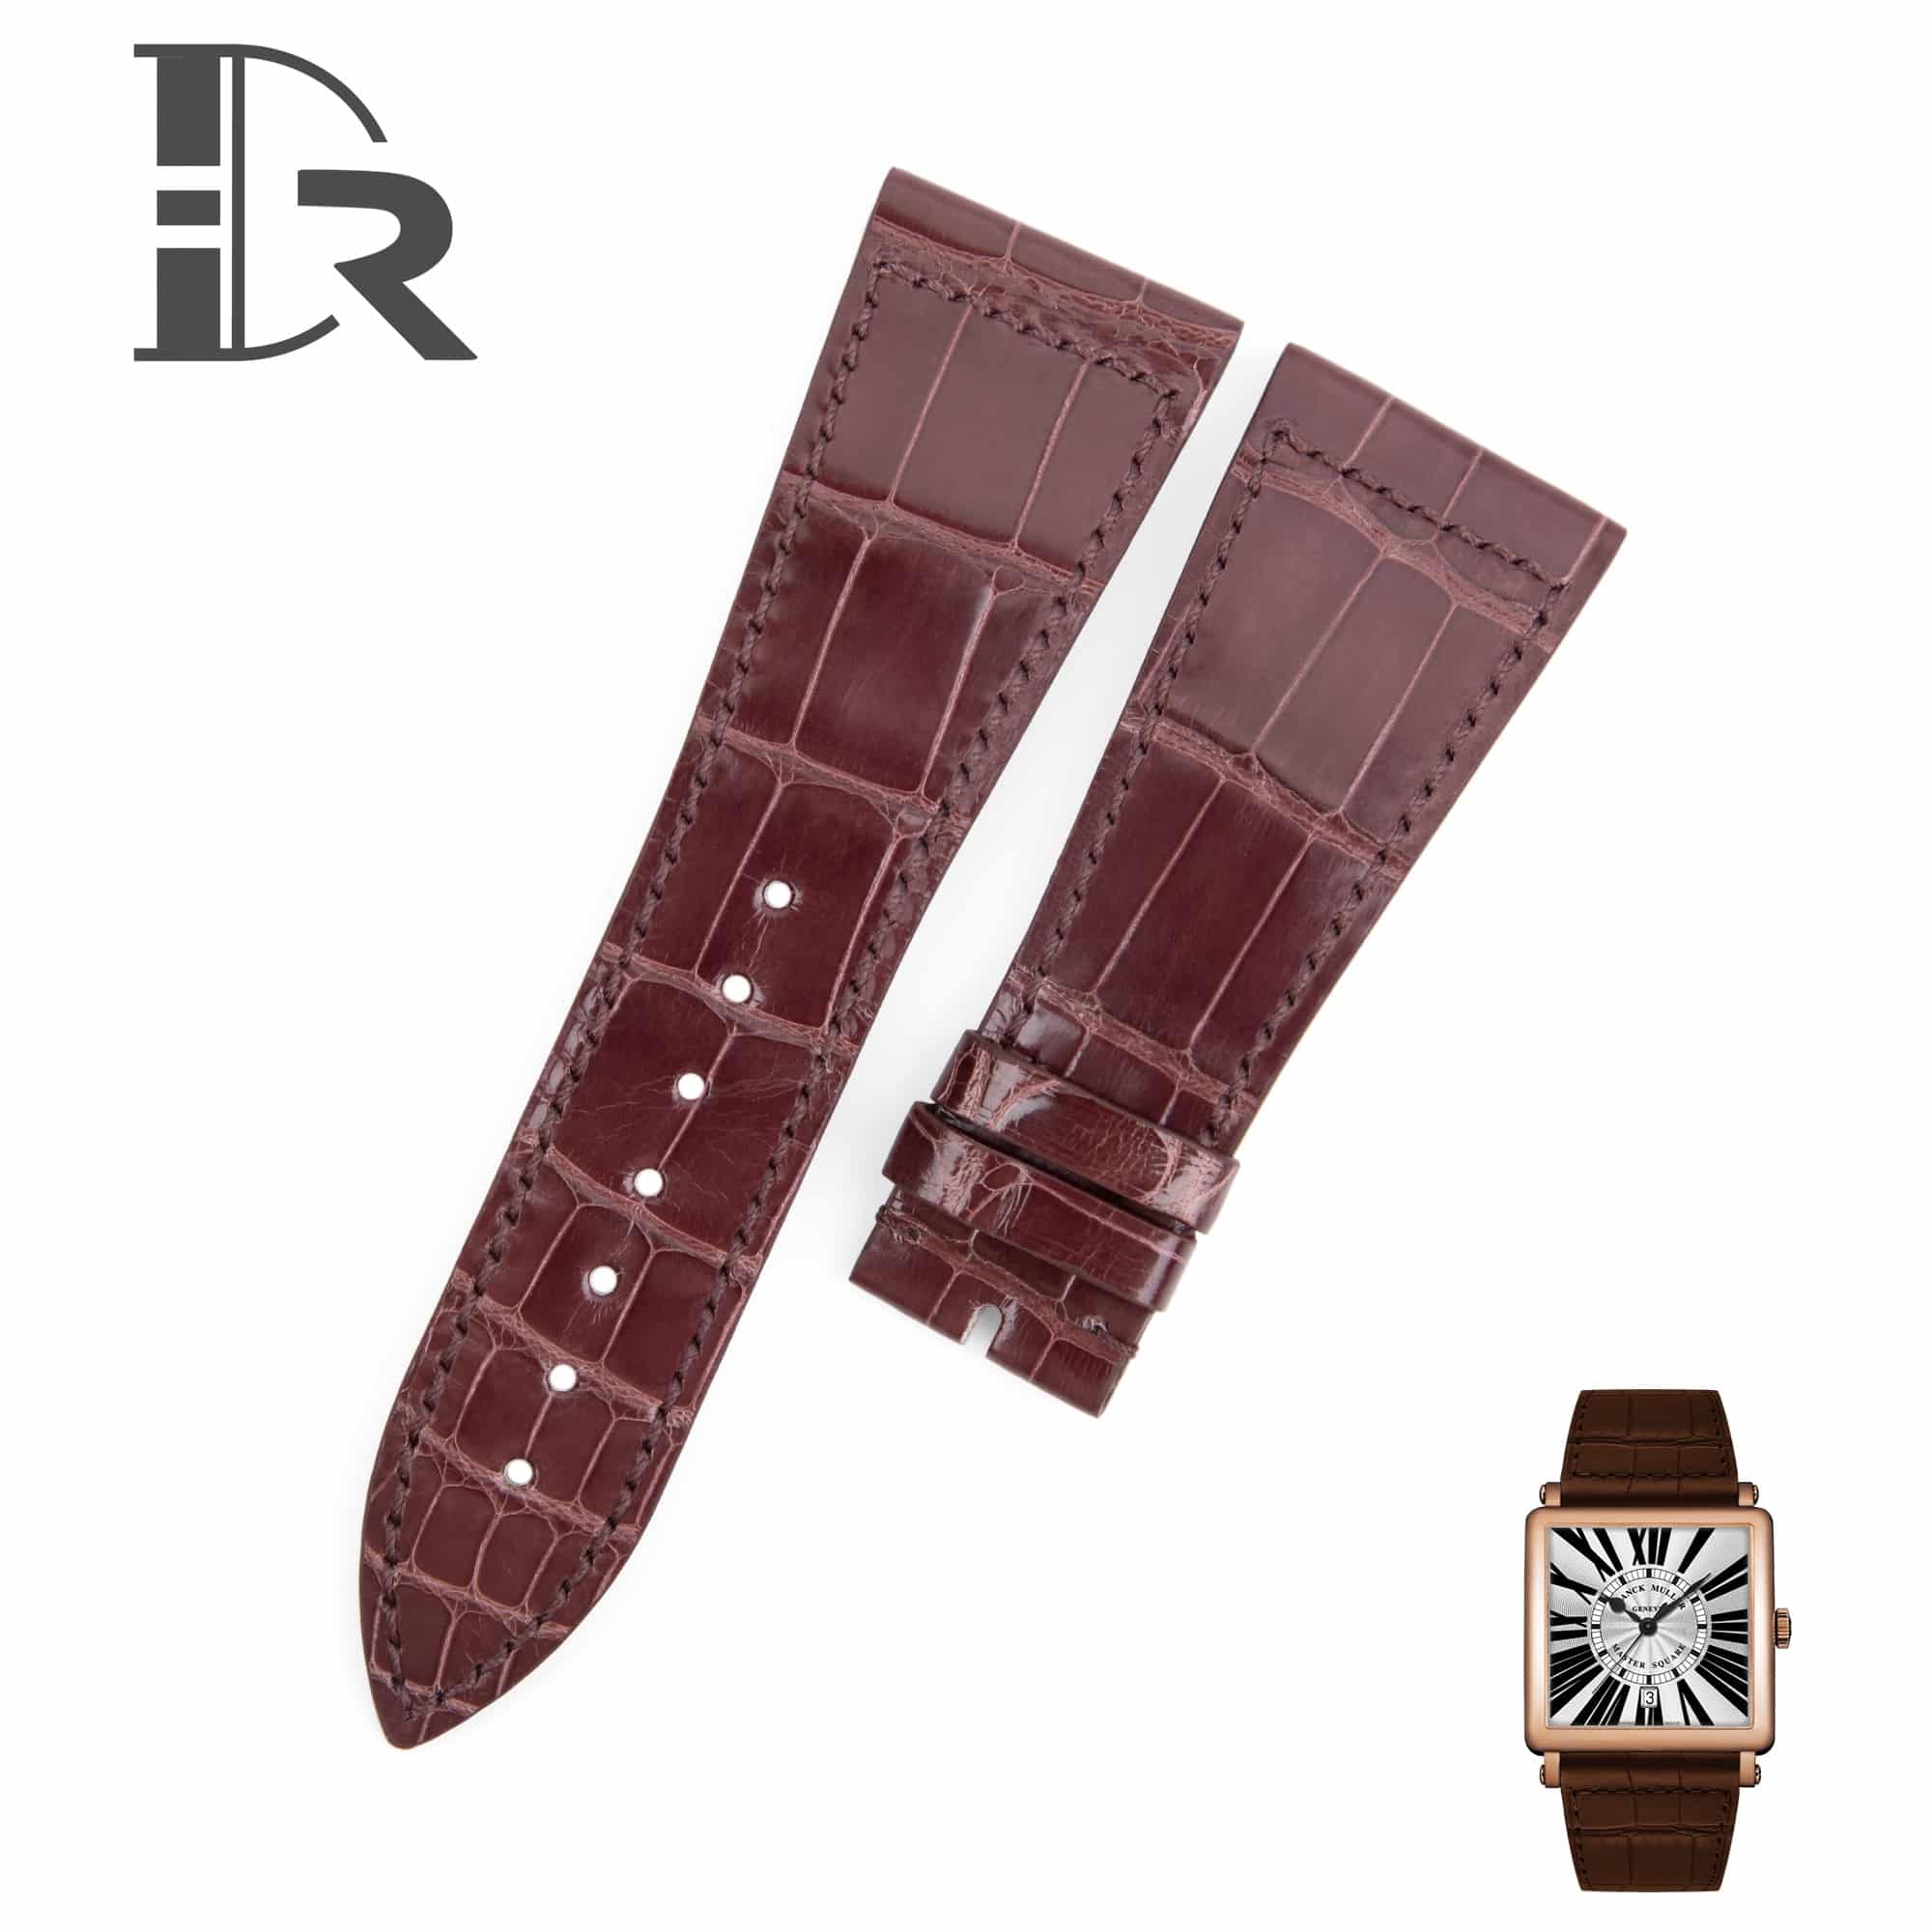 Custom handmade best quality grade A American crocodile 26mm Brown leather alligator strap and watch band replacement fit for Franck Muller Master Square 6000 h SC DT luxury watches online - High-end leather straps for sale